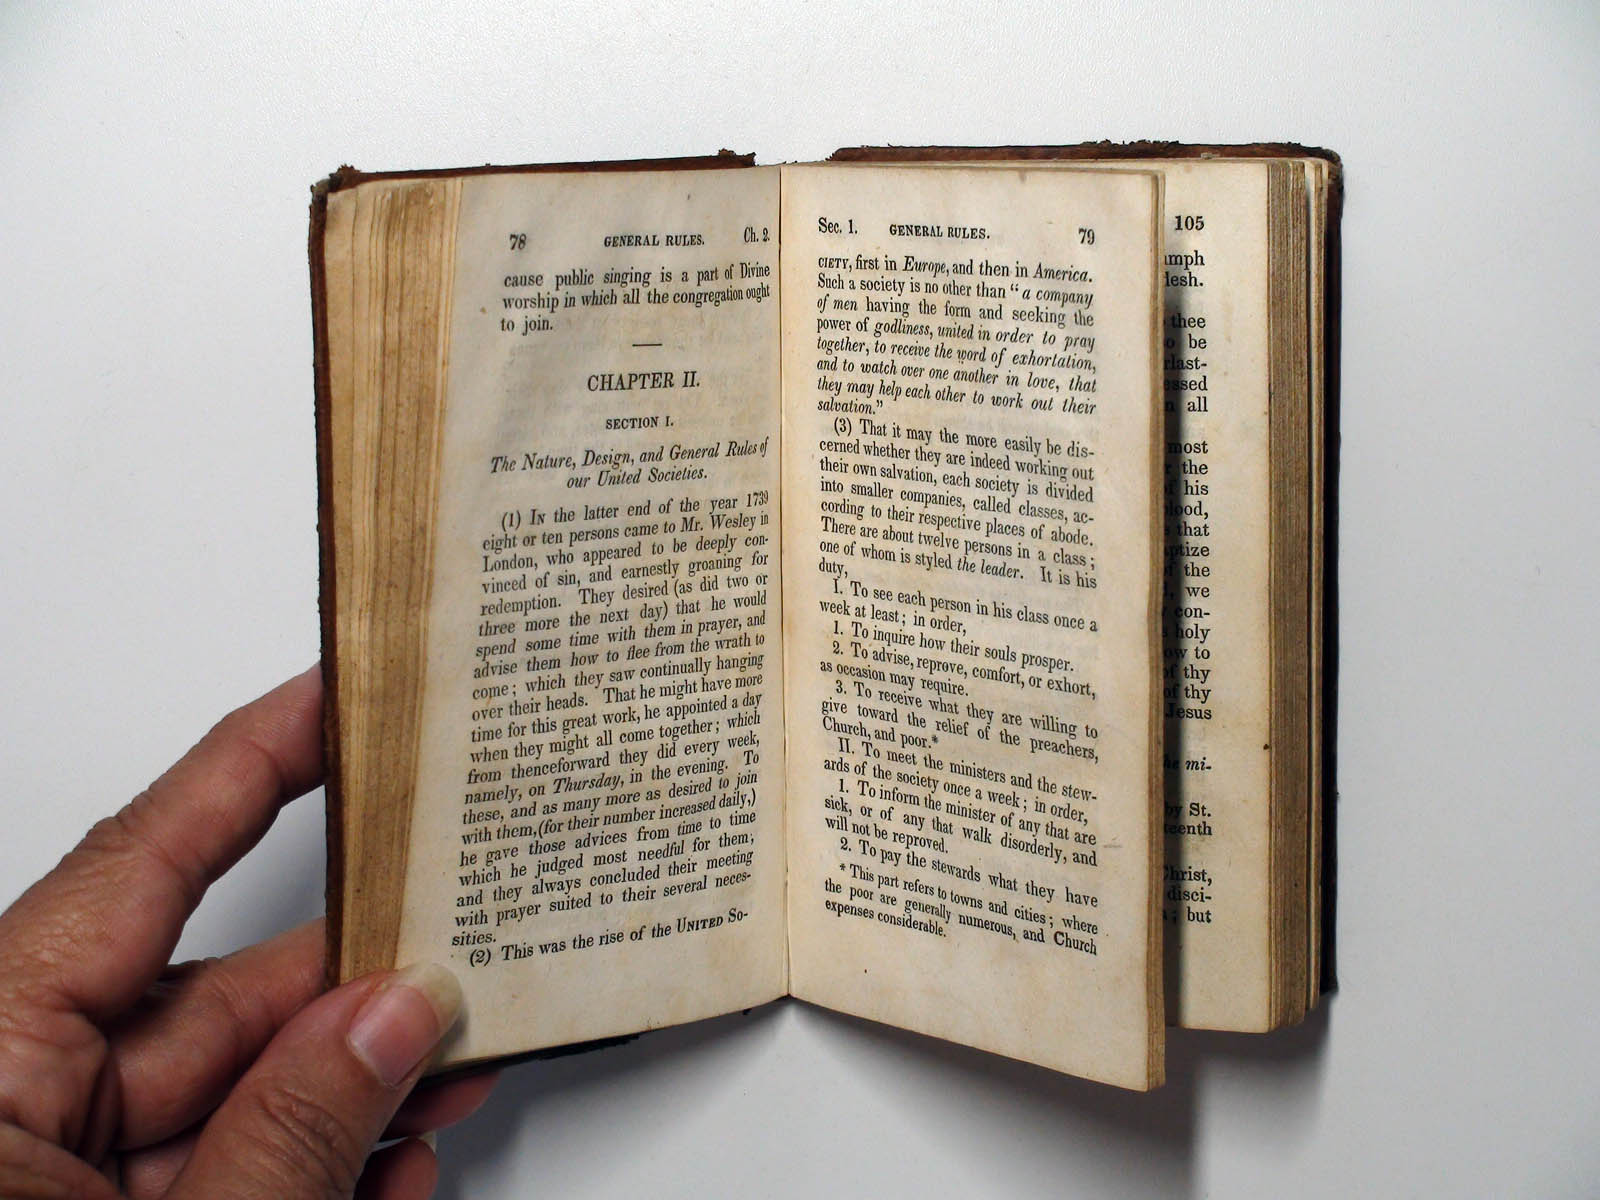 The Doctrines and Discipline of the Methodist Episcopal Church, 1842